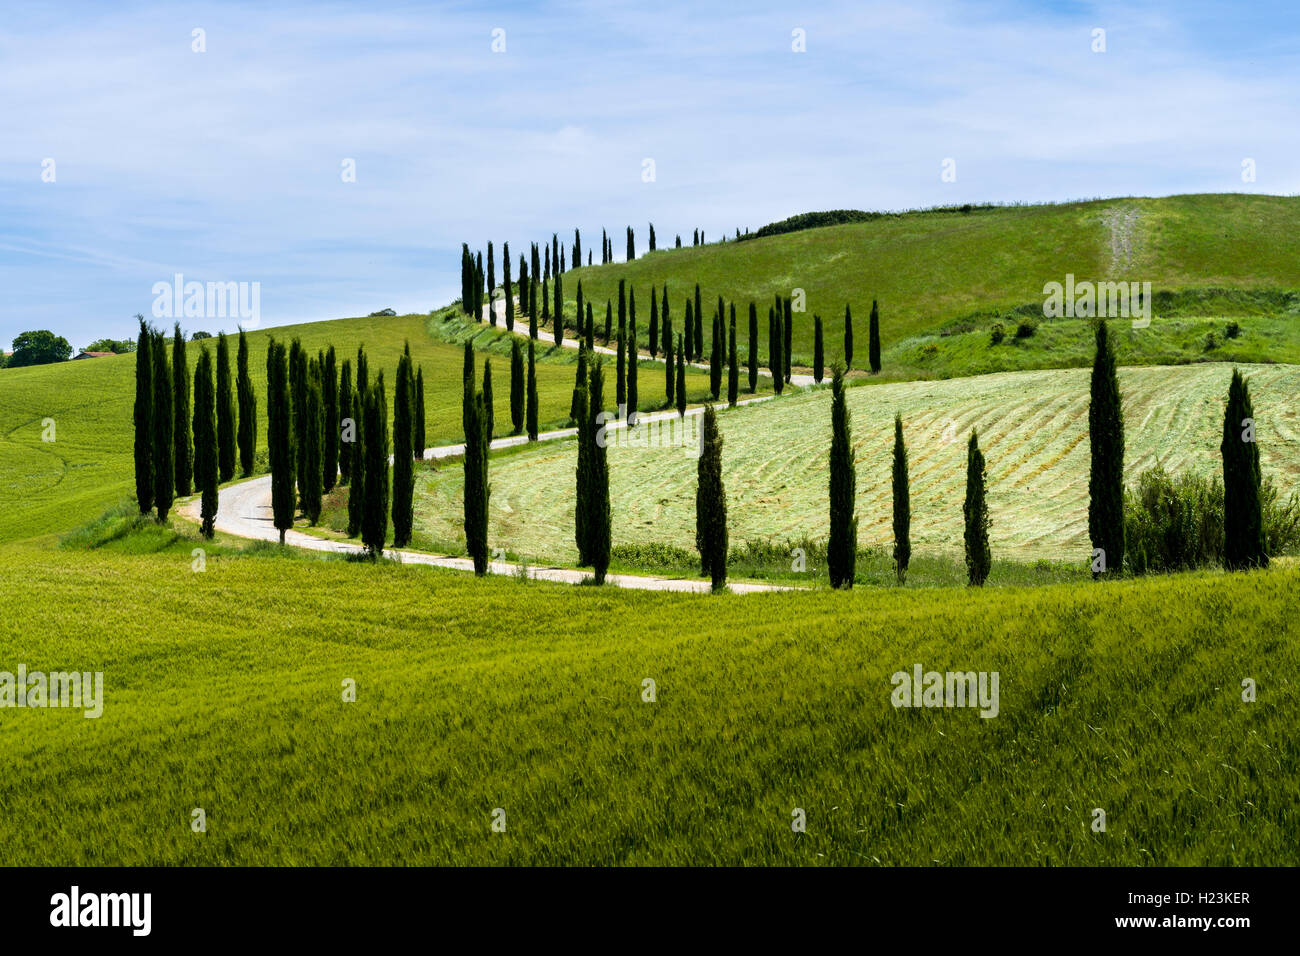 Typical green Tuscany landscape in Val d’Orcia with a winding road, fields, cypresses and blue sky, Trequanda, Tuscany, Italy Stock Photo